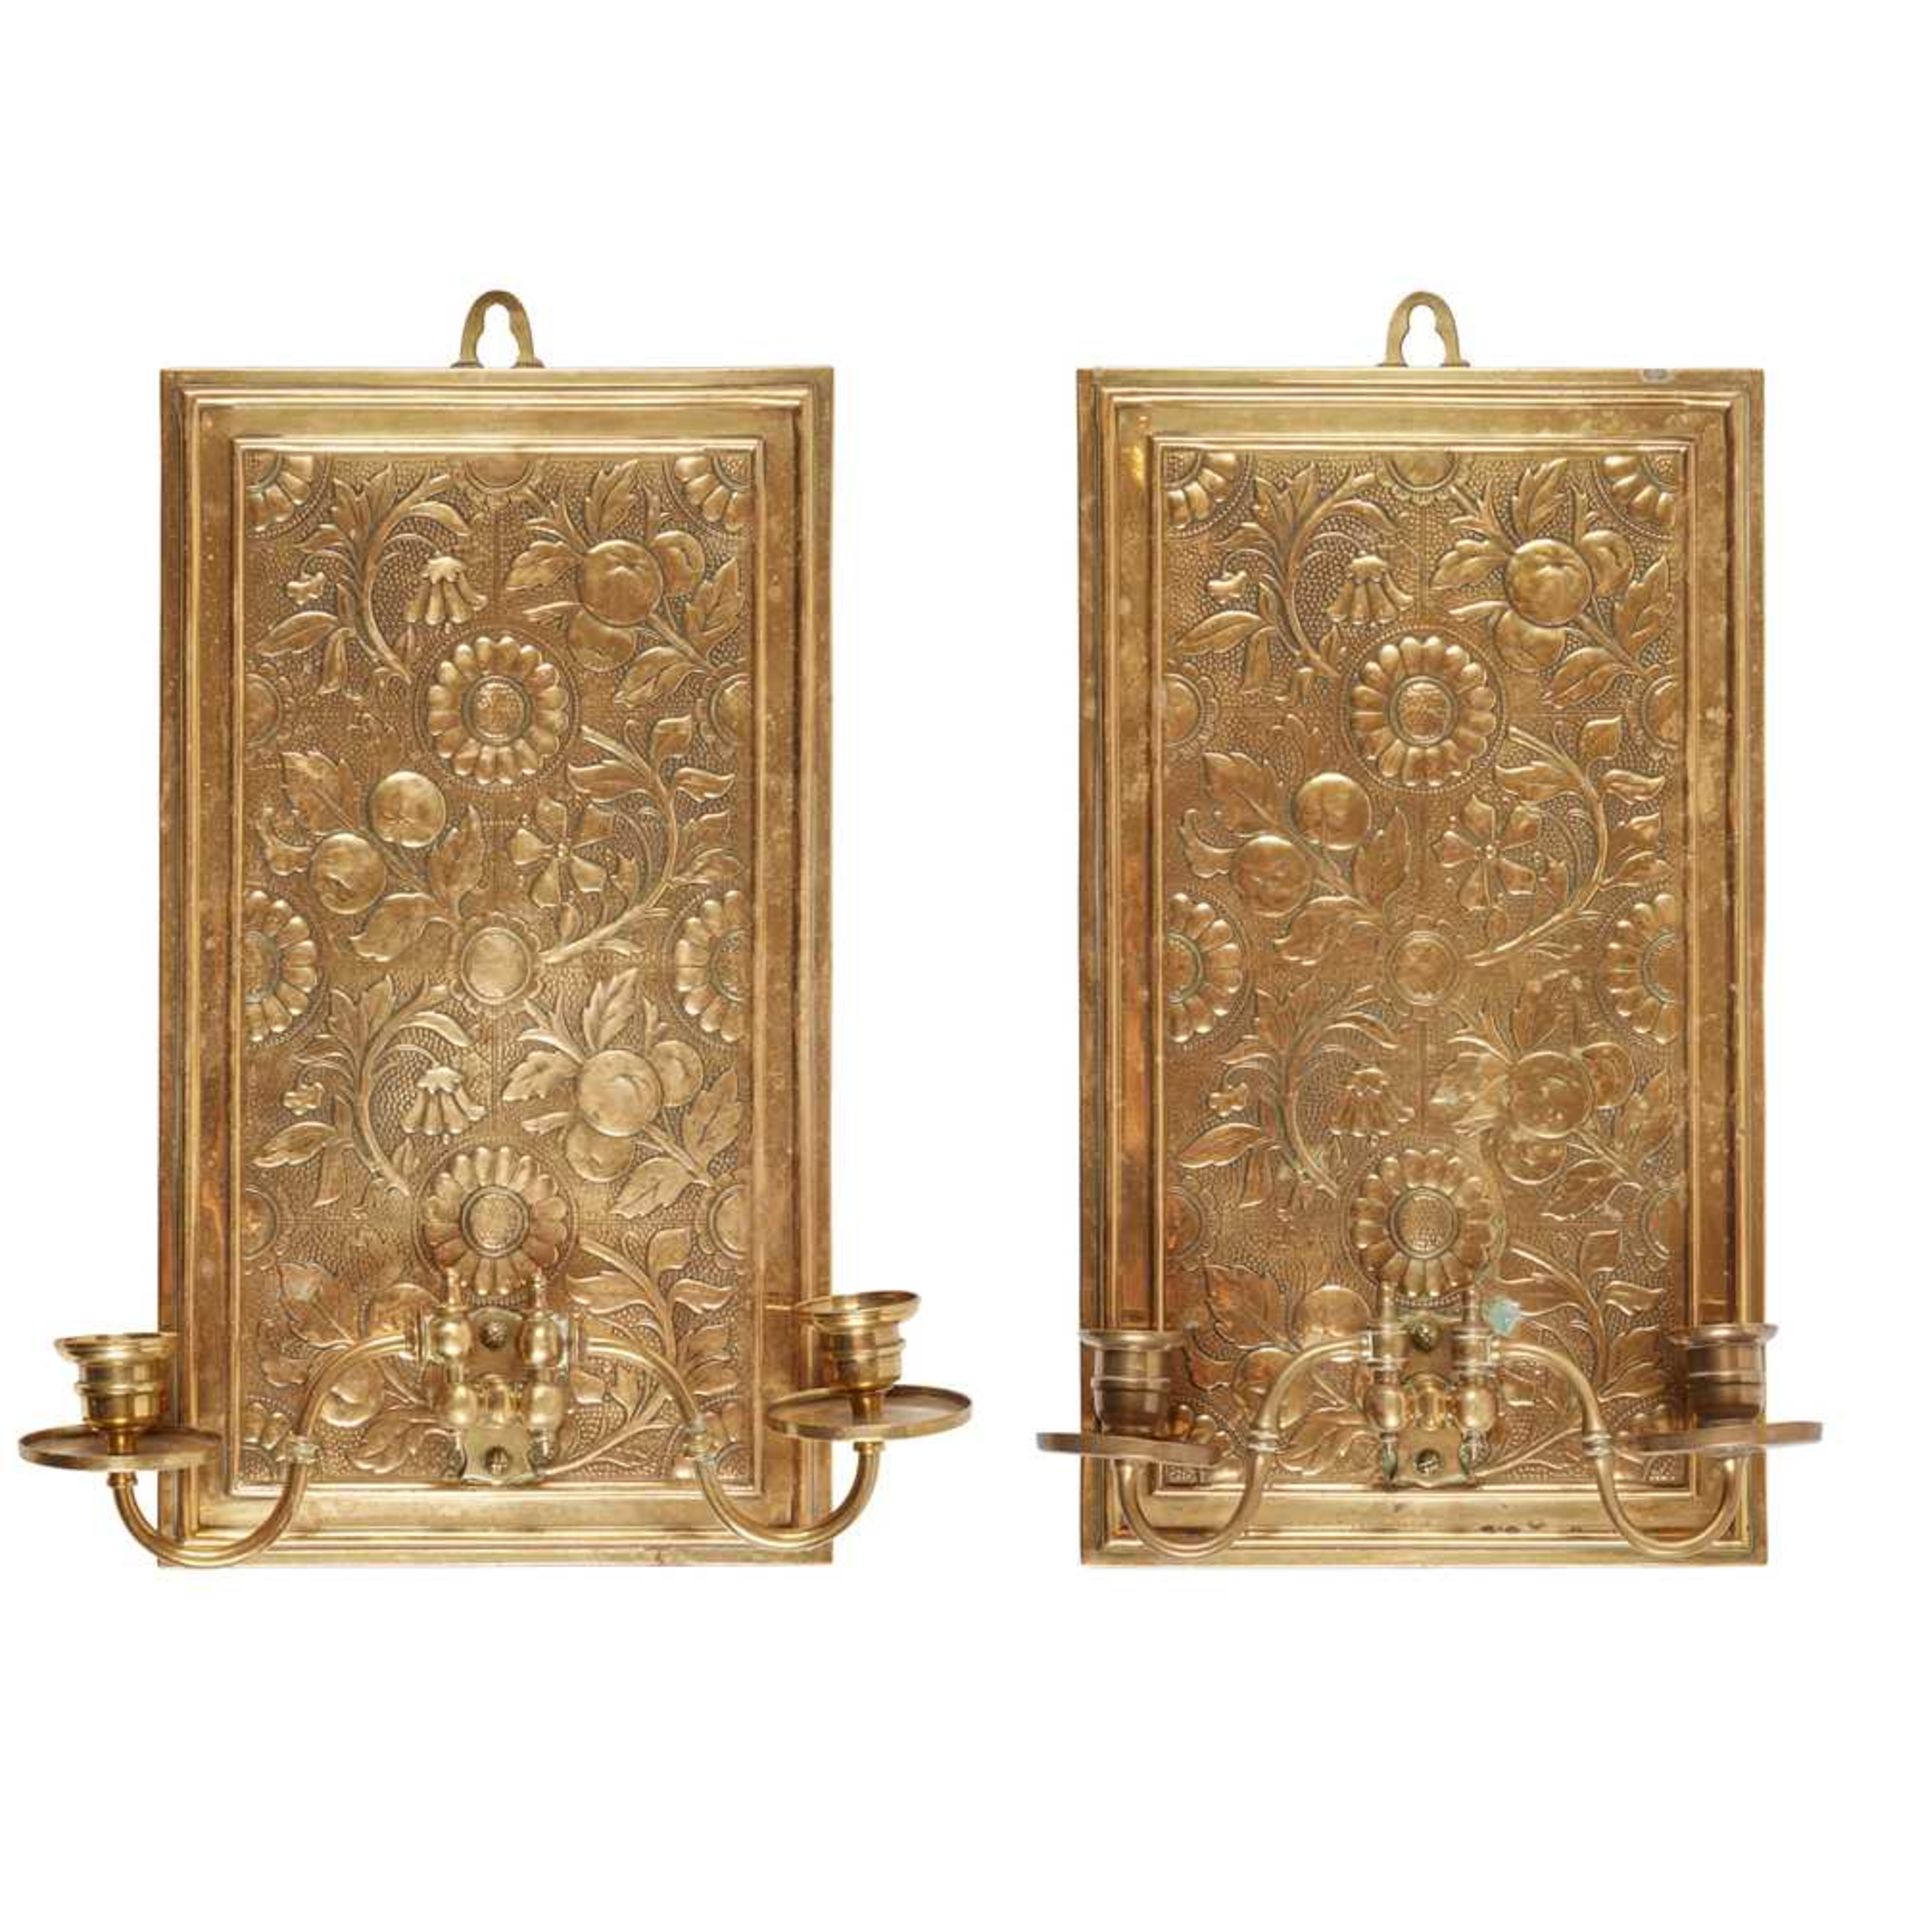 MANNER OF BRUCE TALBERT PAIR OF AESTHETIC MOVEMENT WALL SCONCES, CIRCA 1876